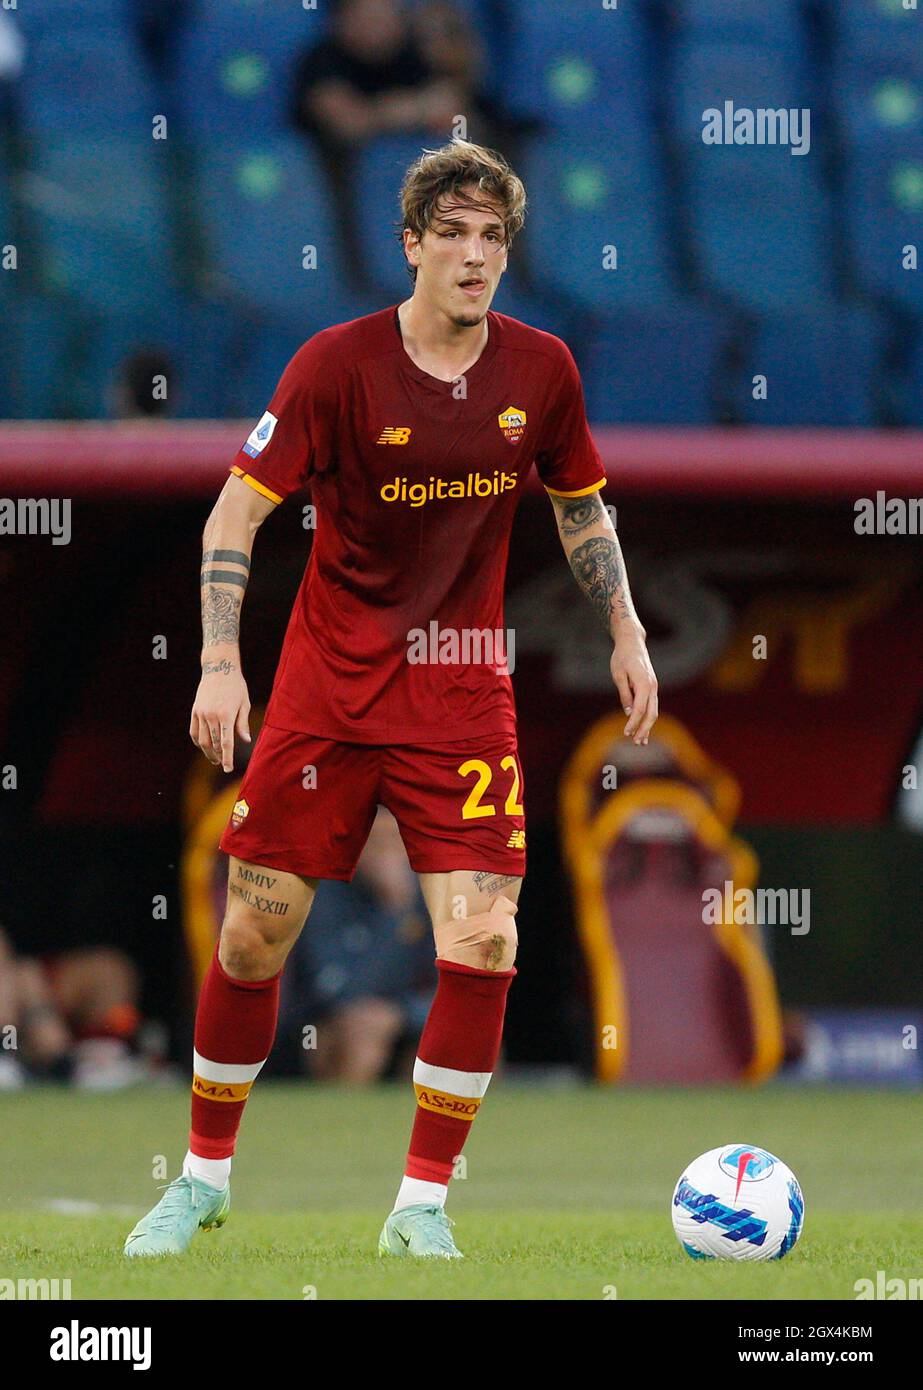 Rome, Italy. 3rd Oct, 2021. Nicolo' Zaniolo, of AS Roma, in action during  the Serie A football match between Roma and Empoli at the Olympic stadium.  Credit: Riccardo De Luca - Update